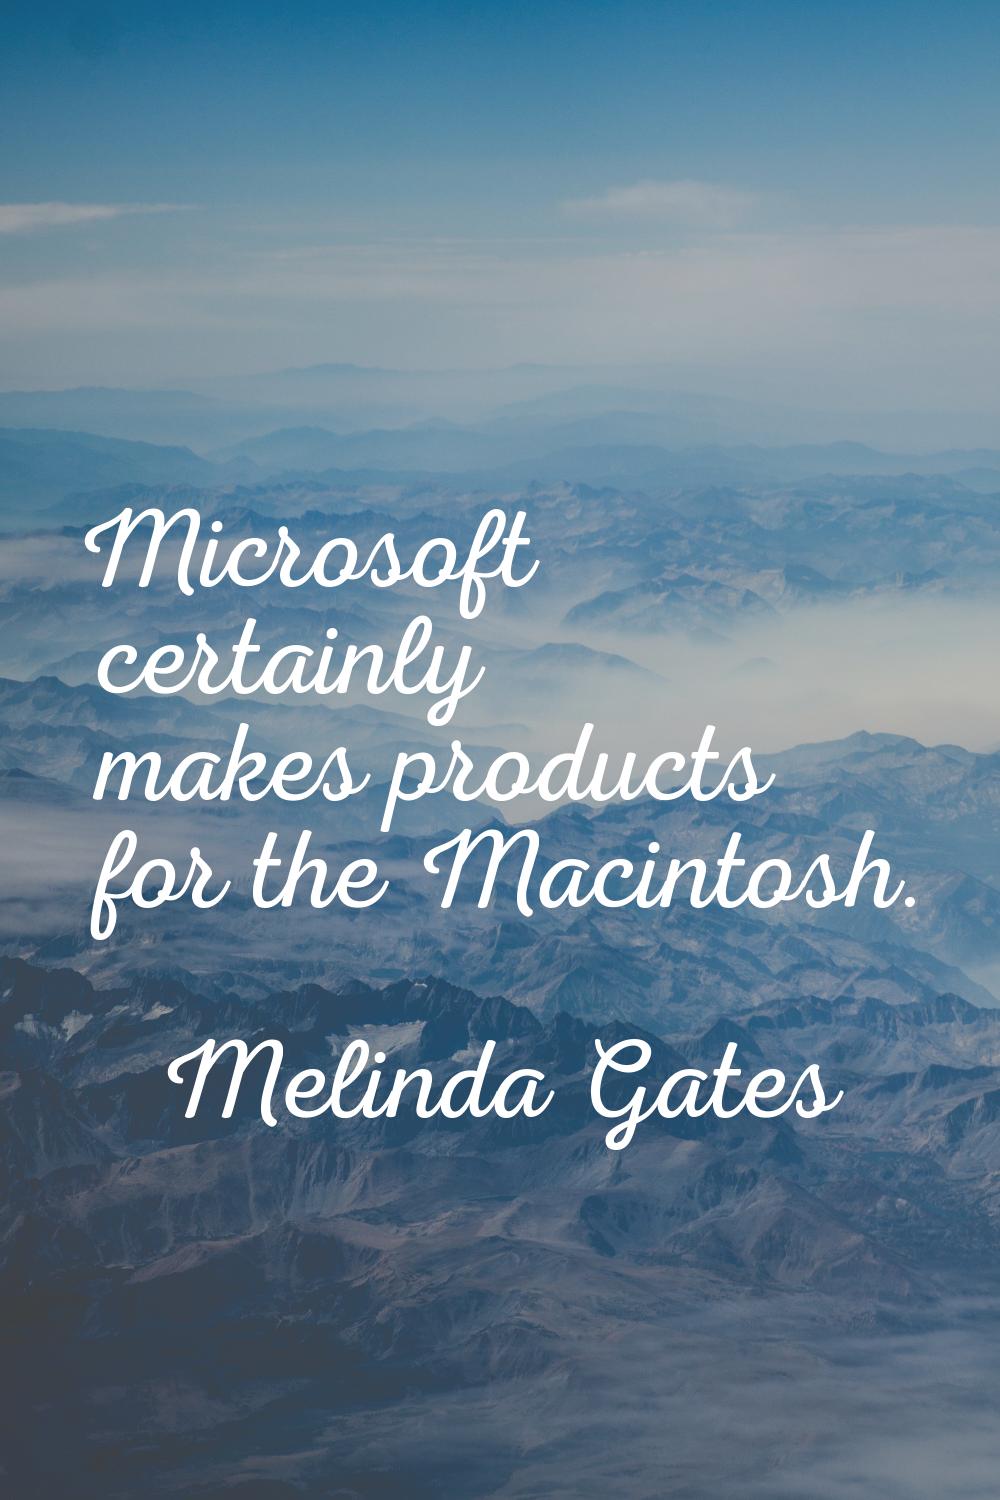 Microsoft certainly makes products for the Macintosh.